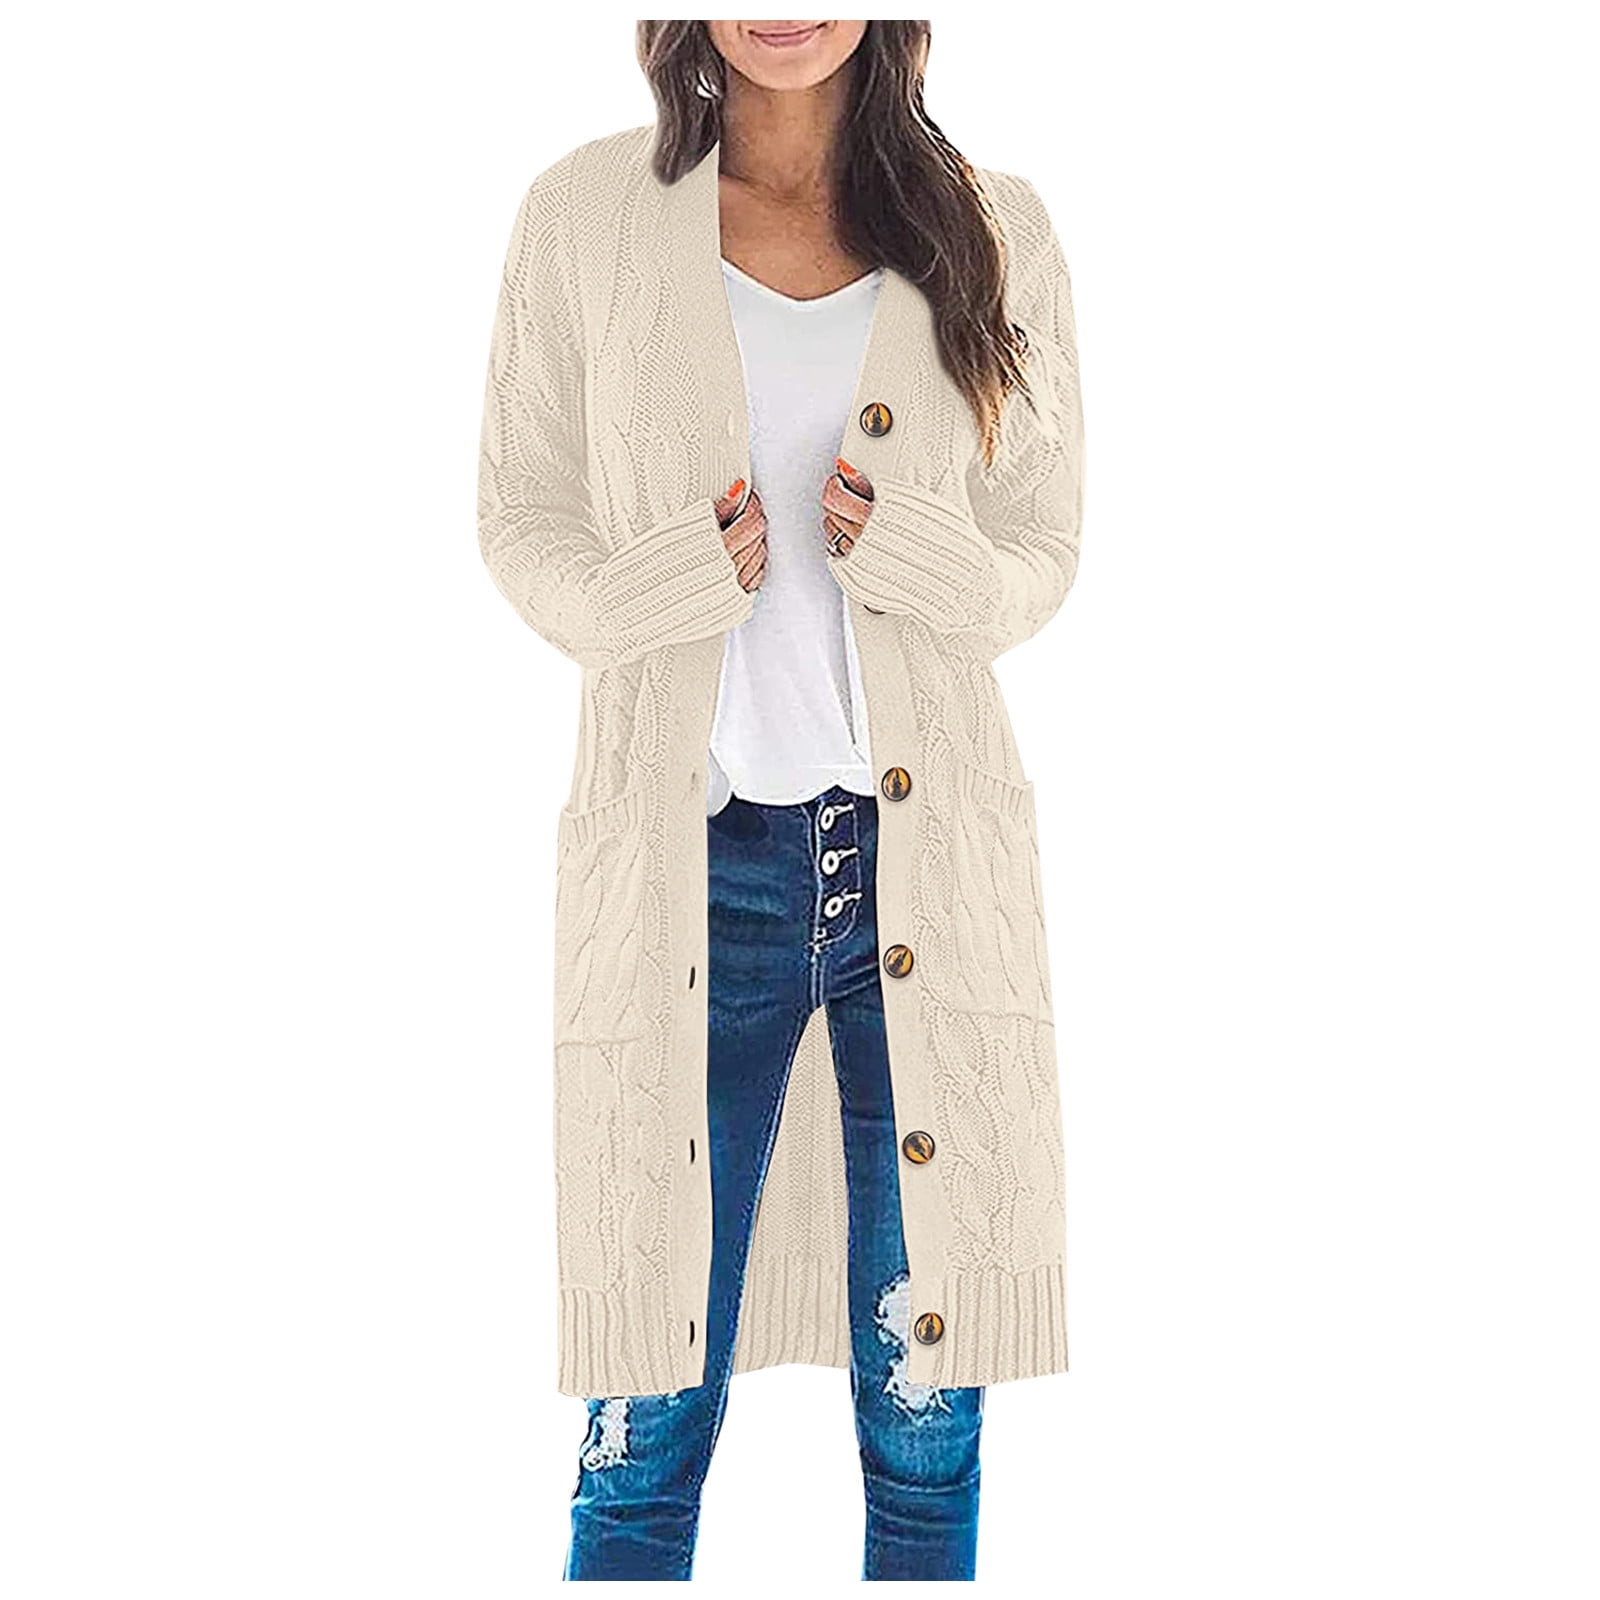 pensum granske Tage af Womens Long Sleeve Cable Knit Long Cardigan Open Front Button Sweater  Outerwear - Walmart.com